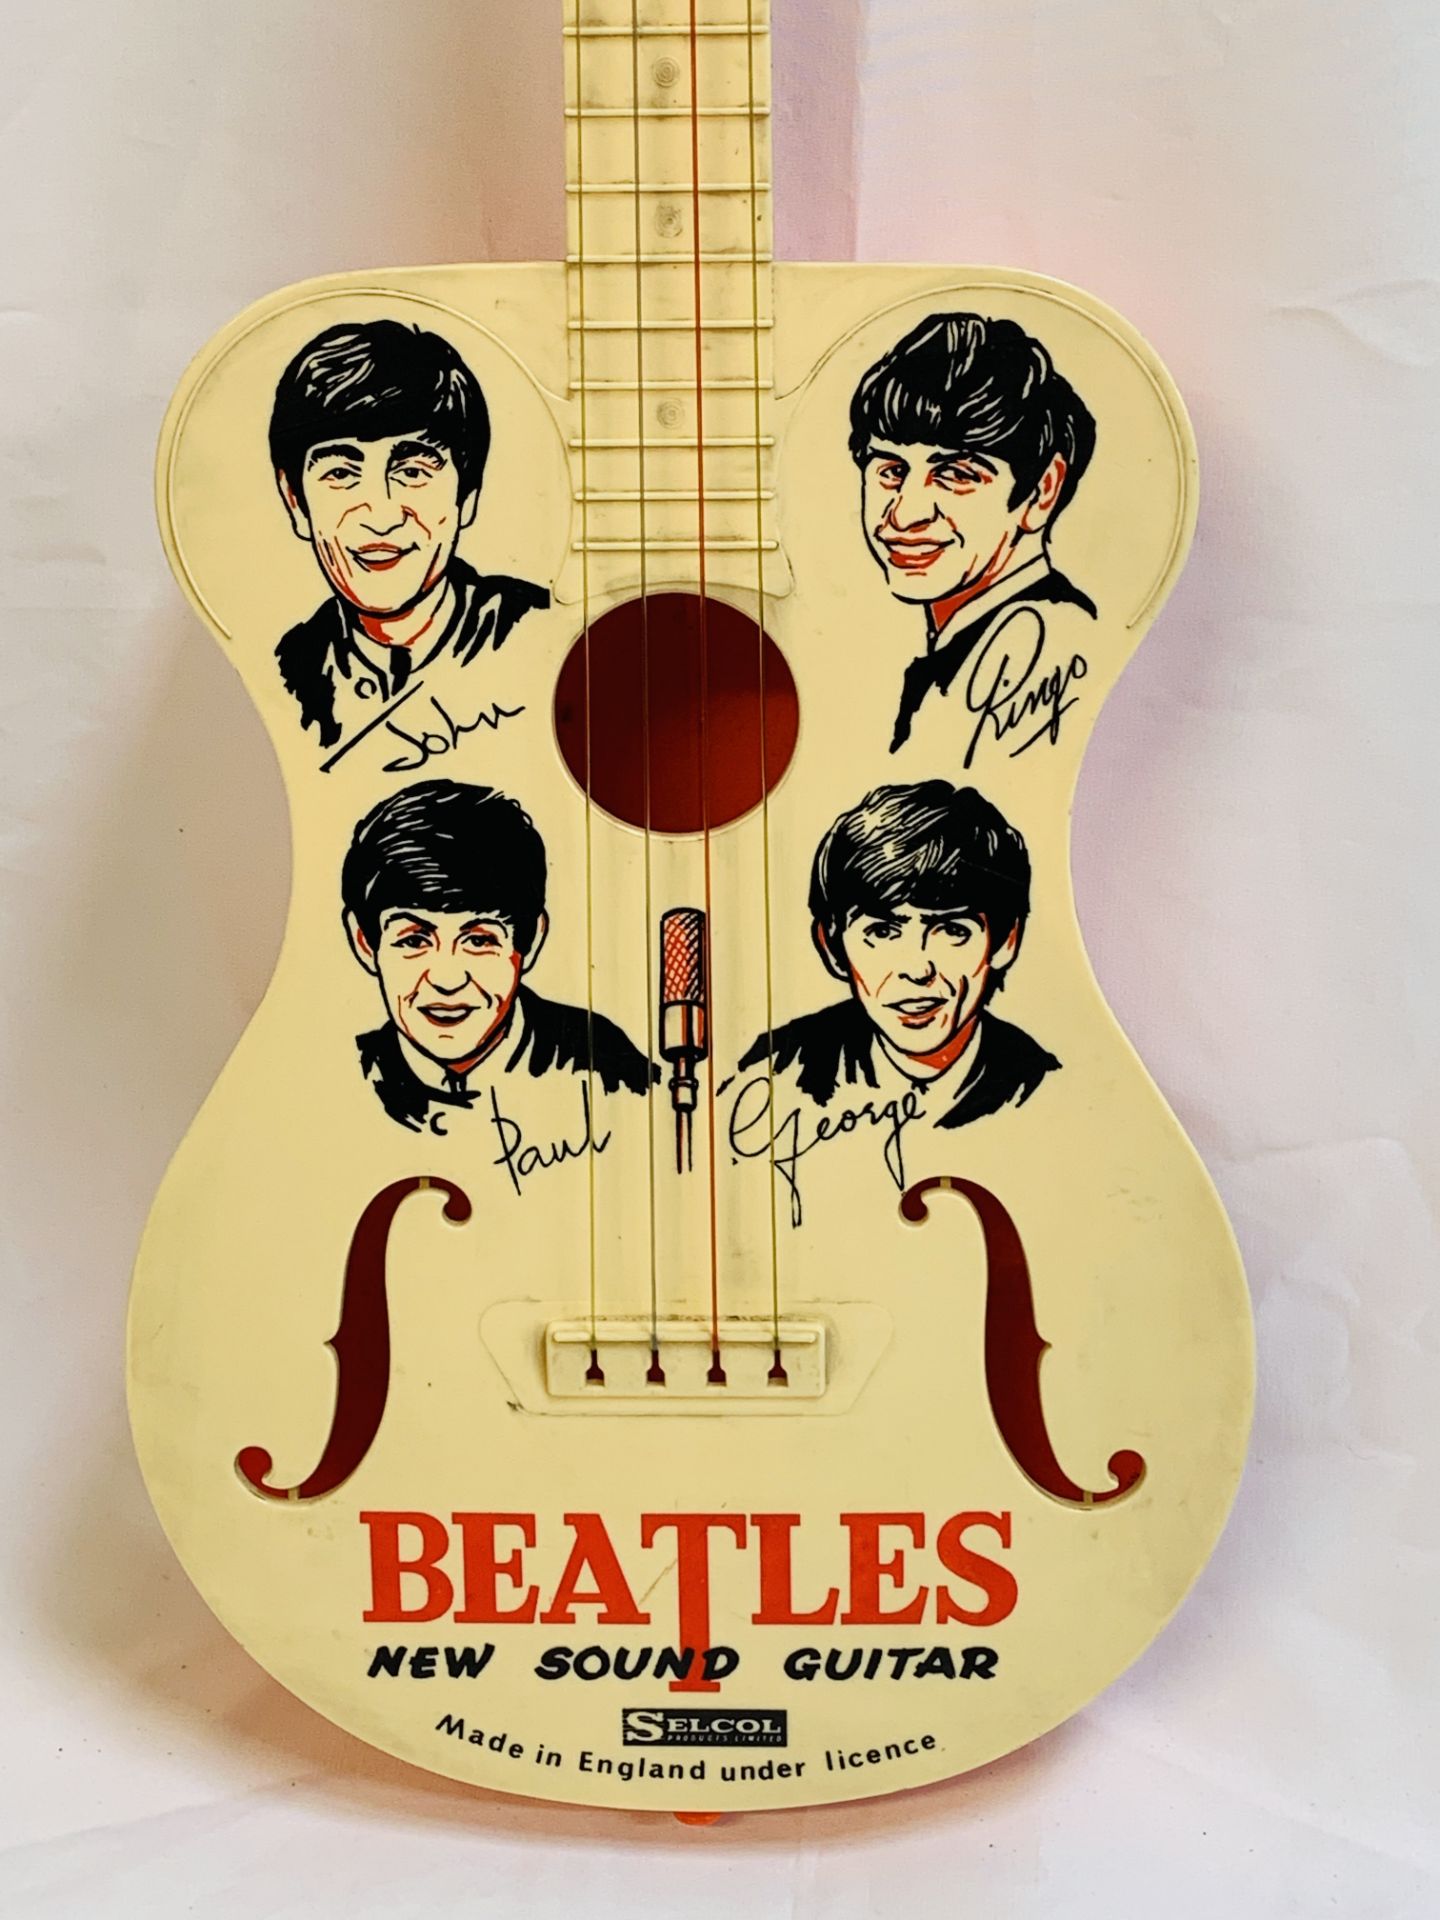 Selcol 'Beatles' new sound model guitar. - Image 2 of 4